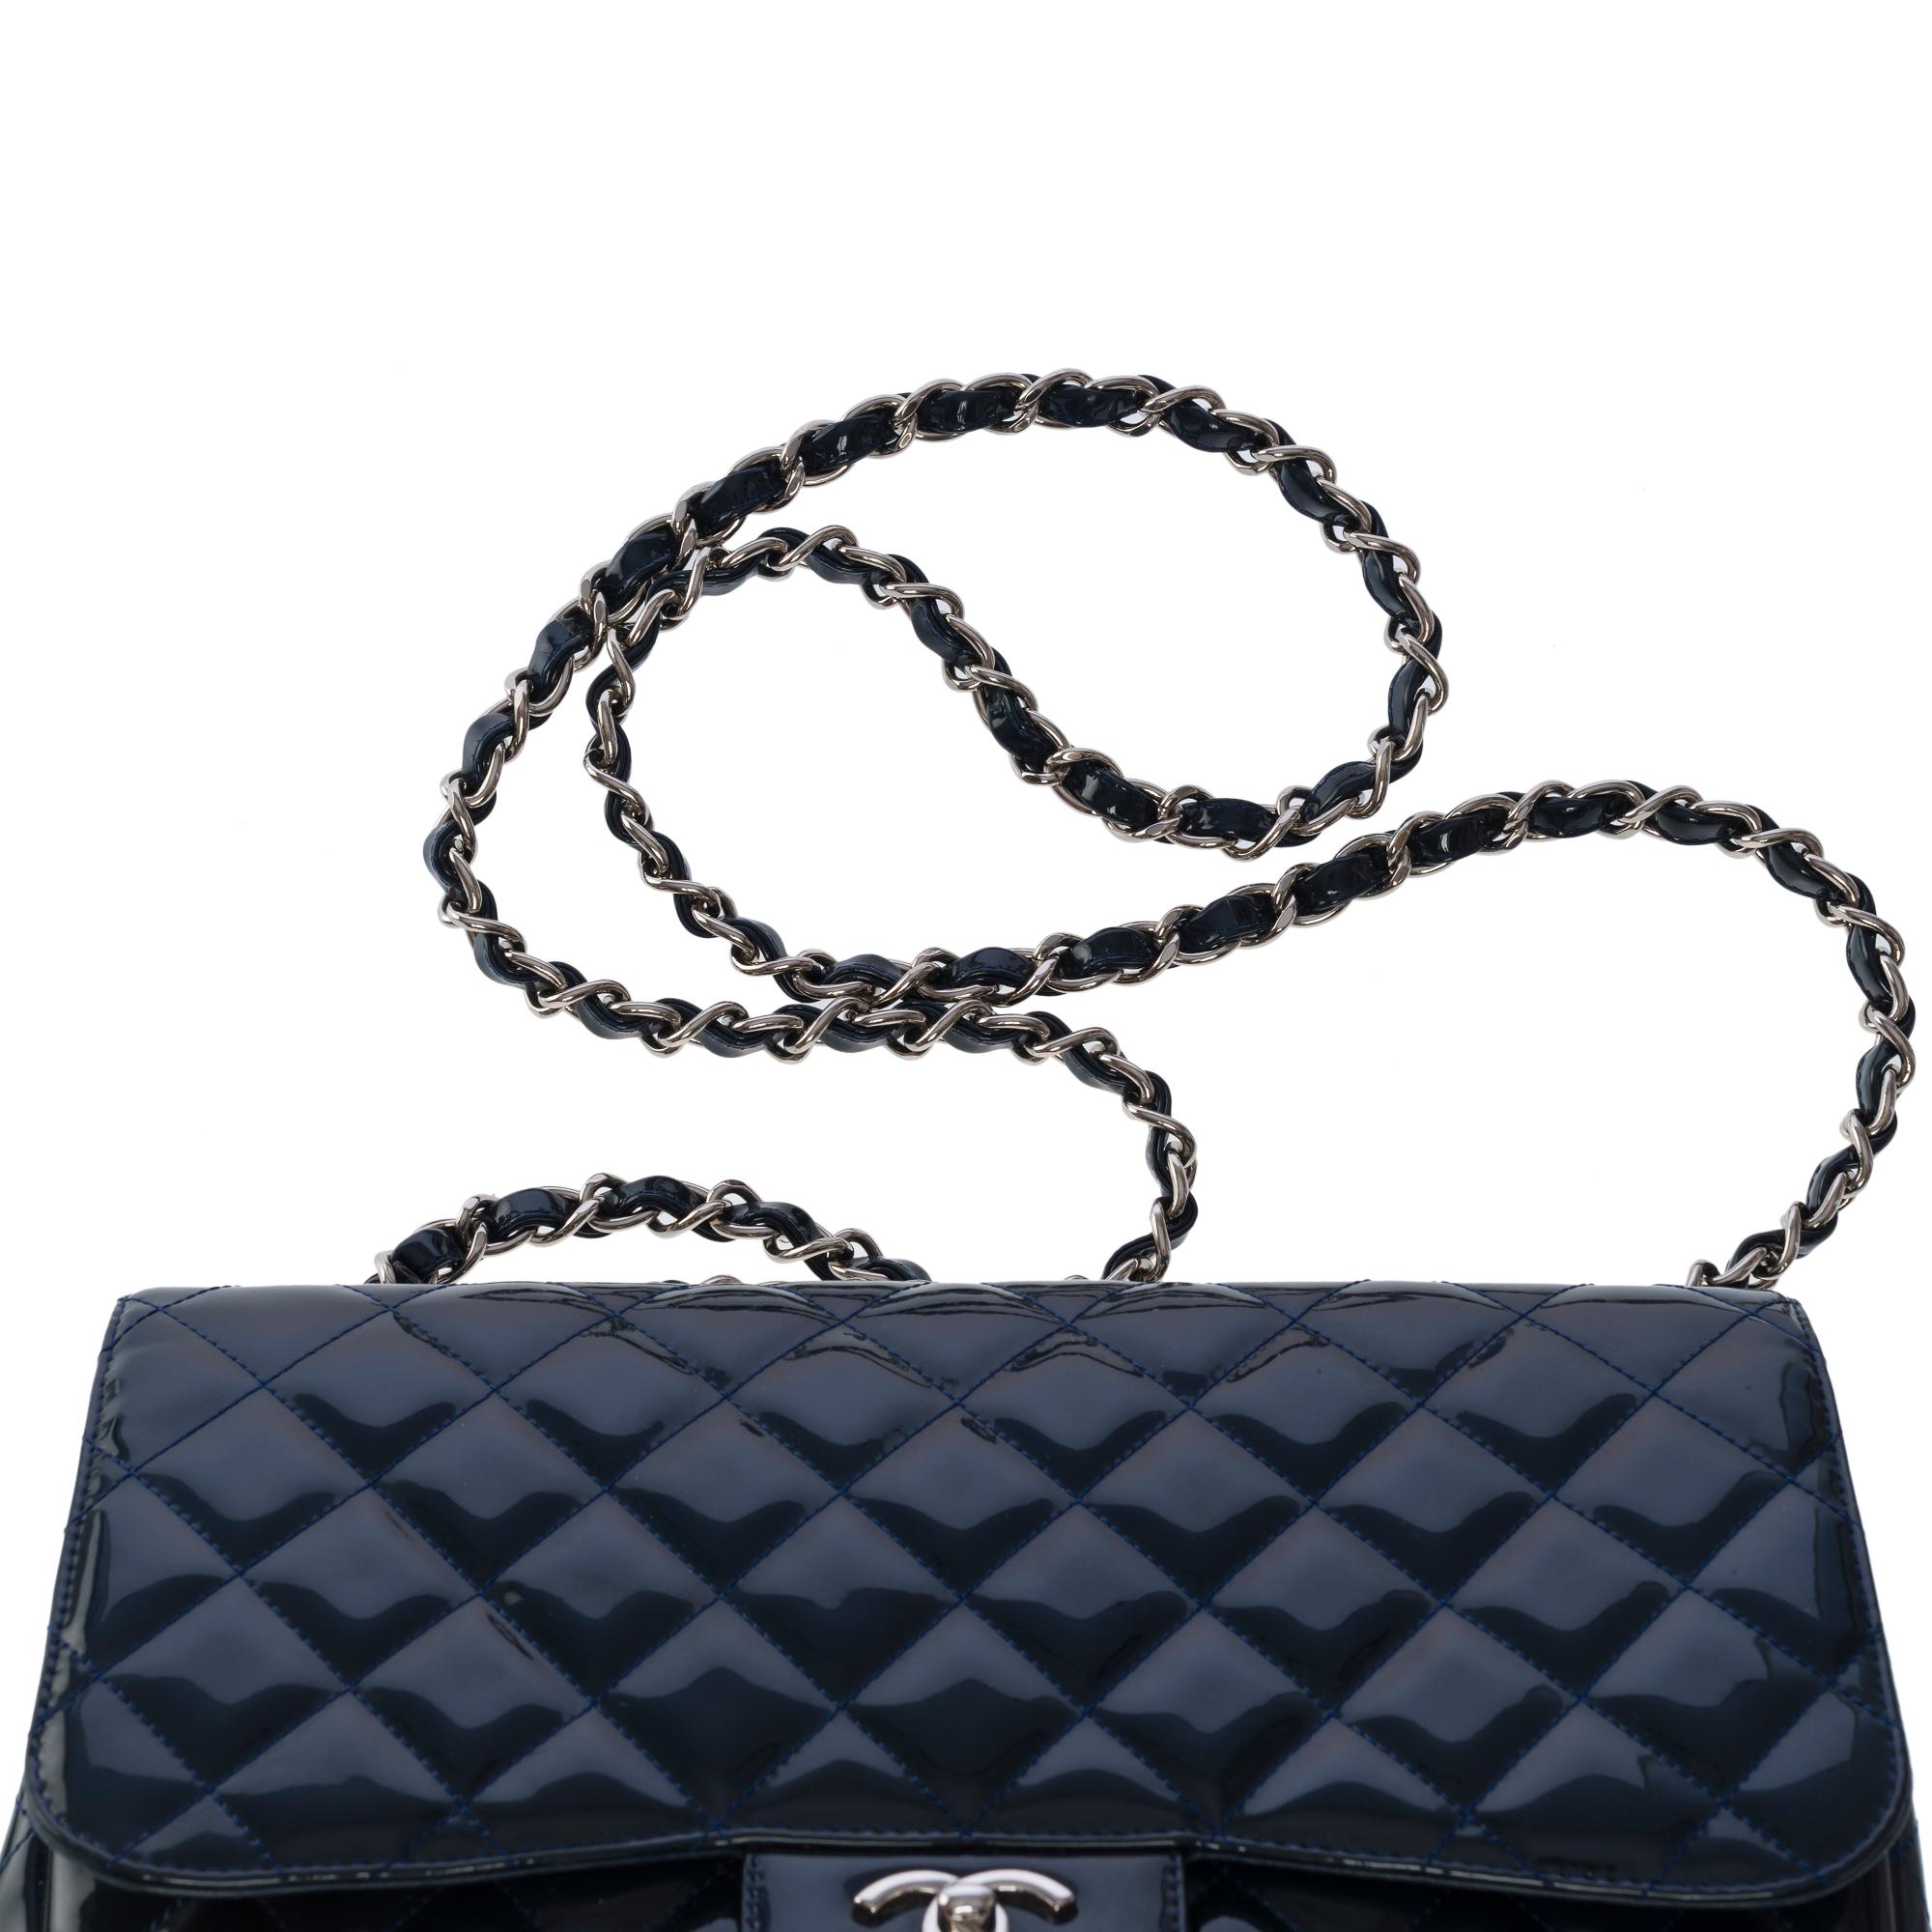 Lovely Chanel Timeless Jumbo shoulder flap bag in Navy blue patent leather, SHW 5